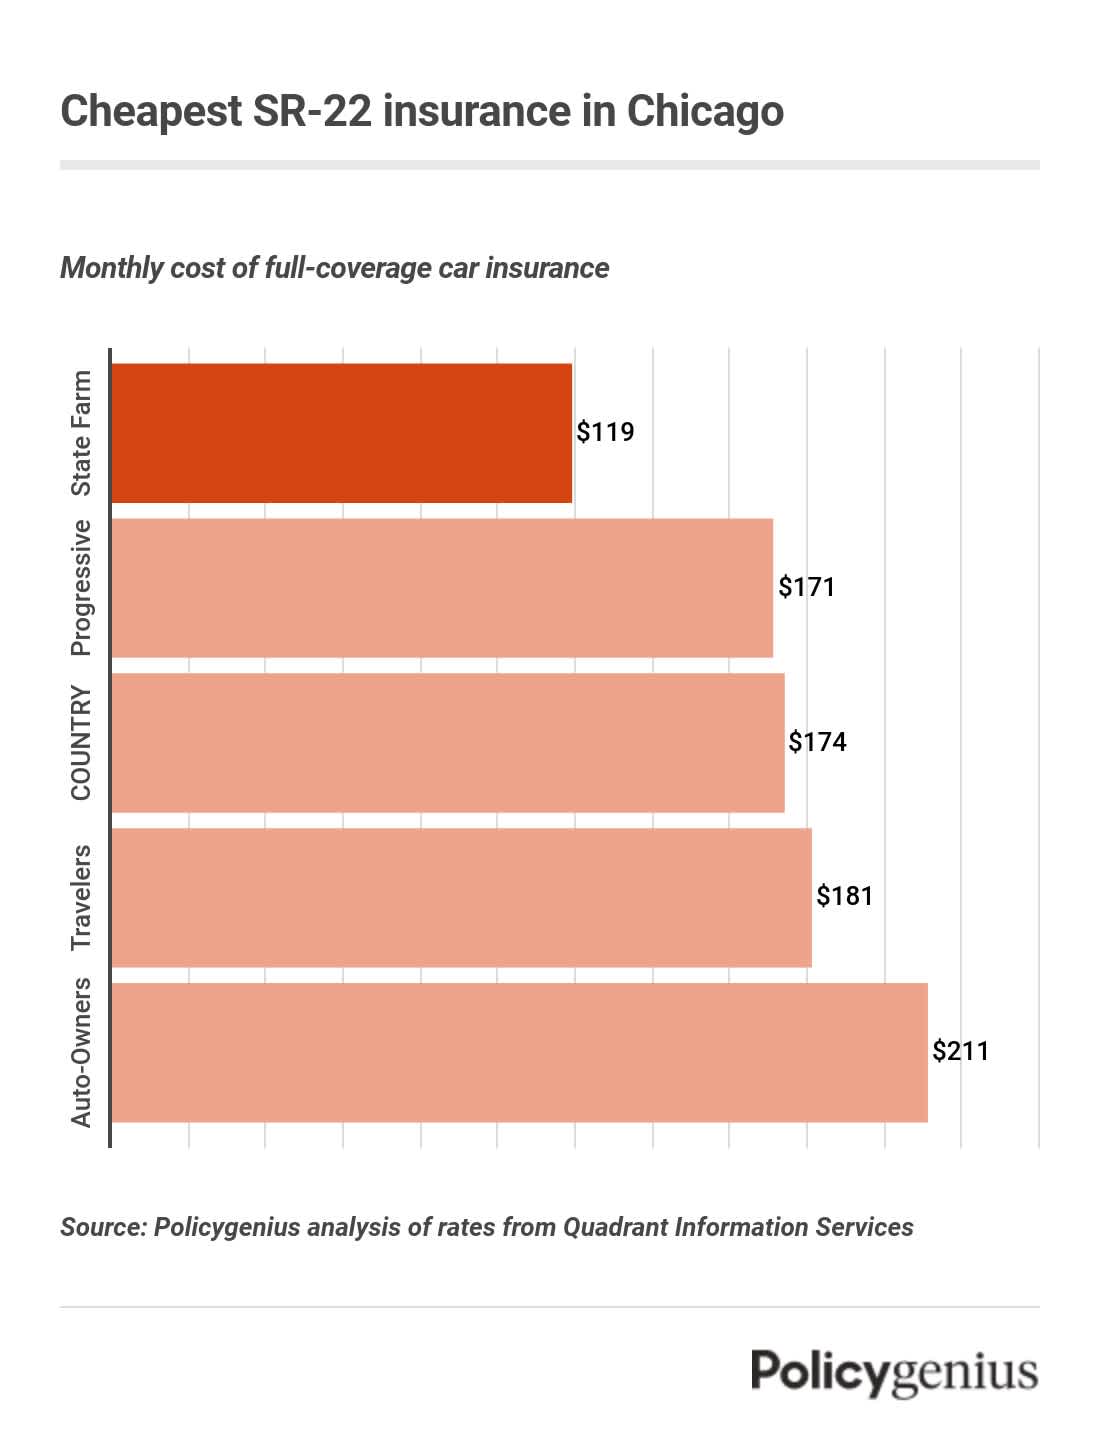 A bar graph showing the company with the cheapest car insurance for drivers with an Sr-22 in Chicago. The cheapest company is State Farm.